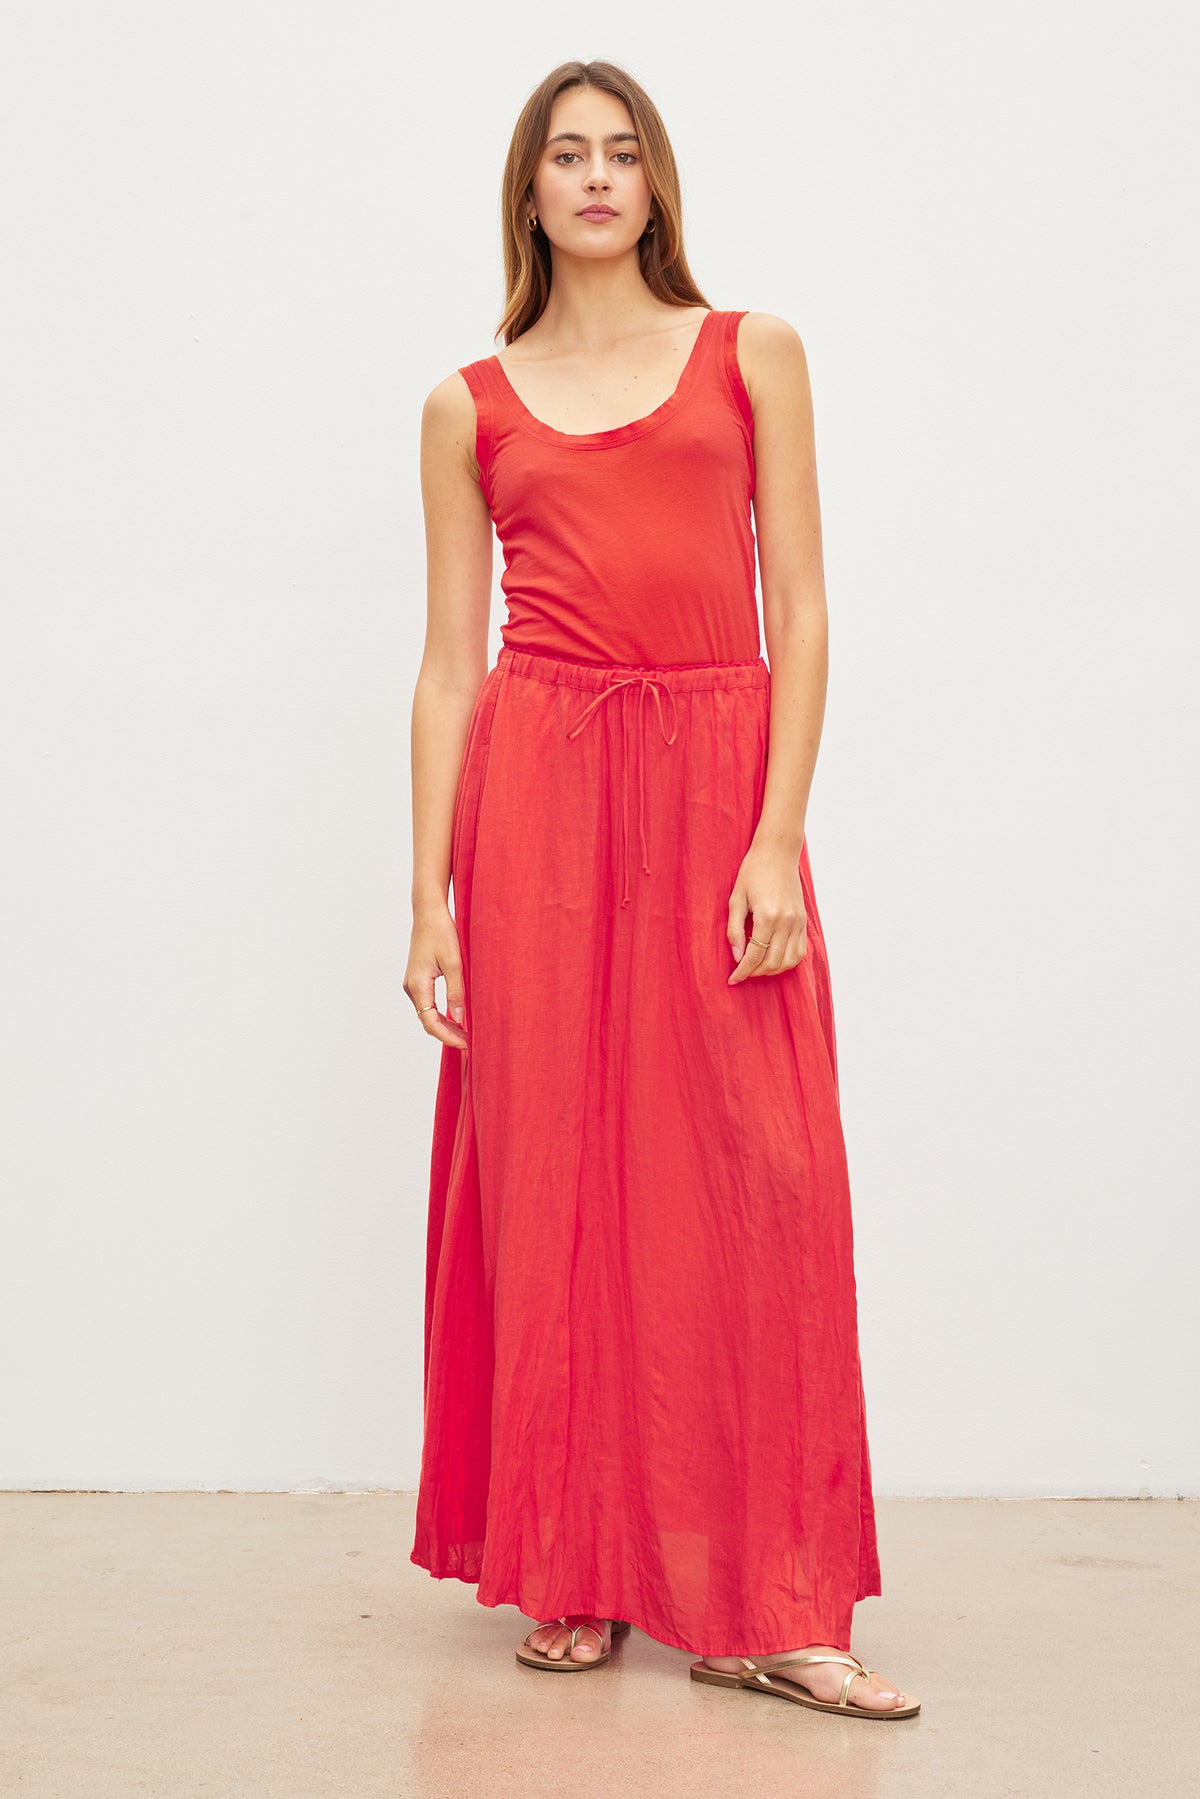   A woman donning the Velvet by Graham & Spencer BAILEY LINEN MAXI SKIRT, a stunning red maxi dress made from woven linen fabric, featuring an elegant elastic drawstring waist for added comfort and style. 